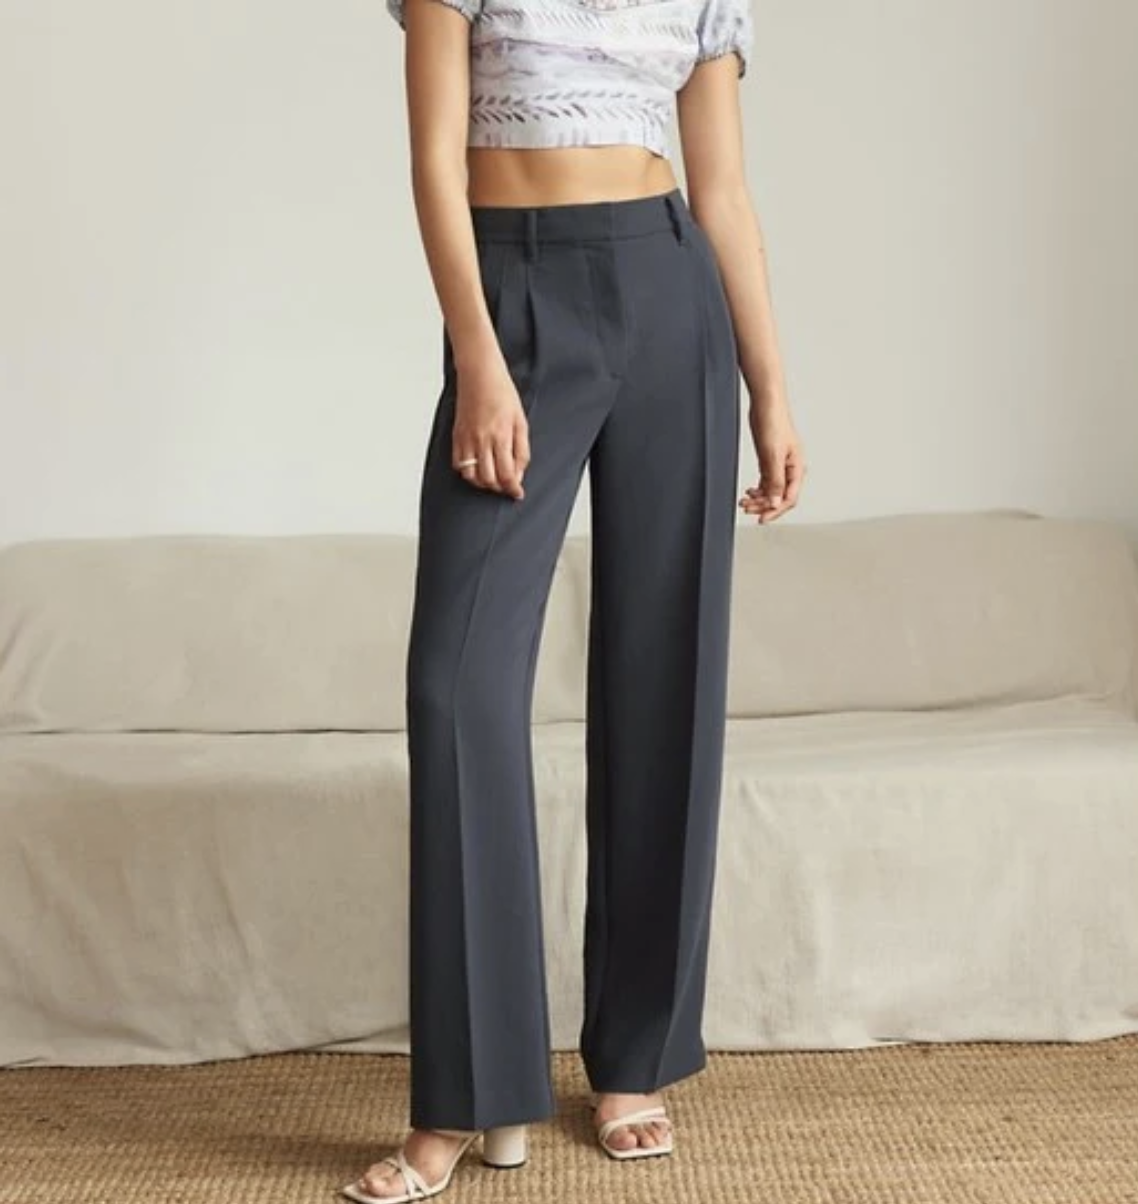 Is the Aritzia Effortless Pant Worth the Hype?